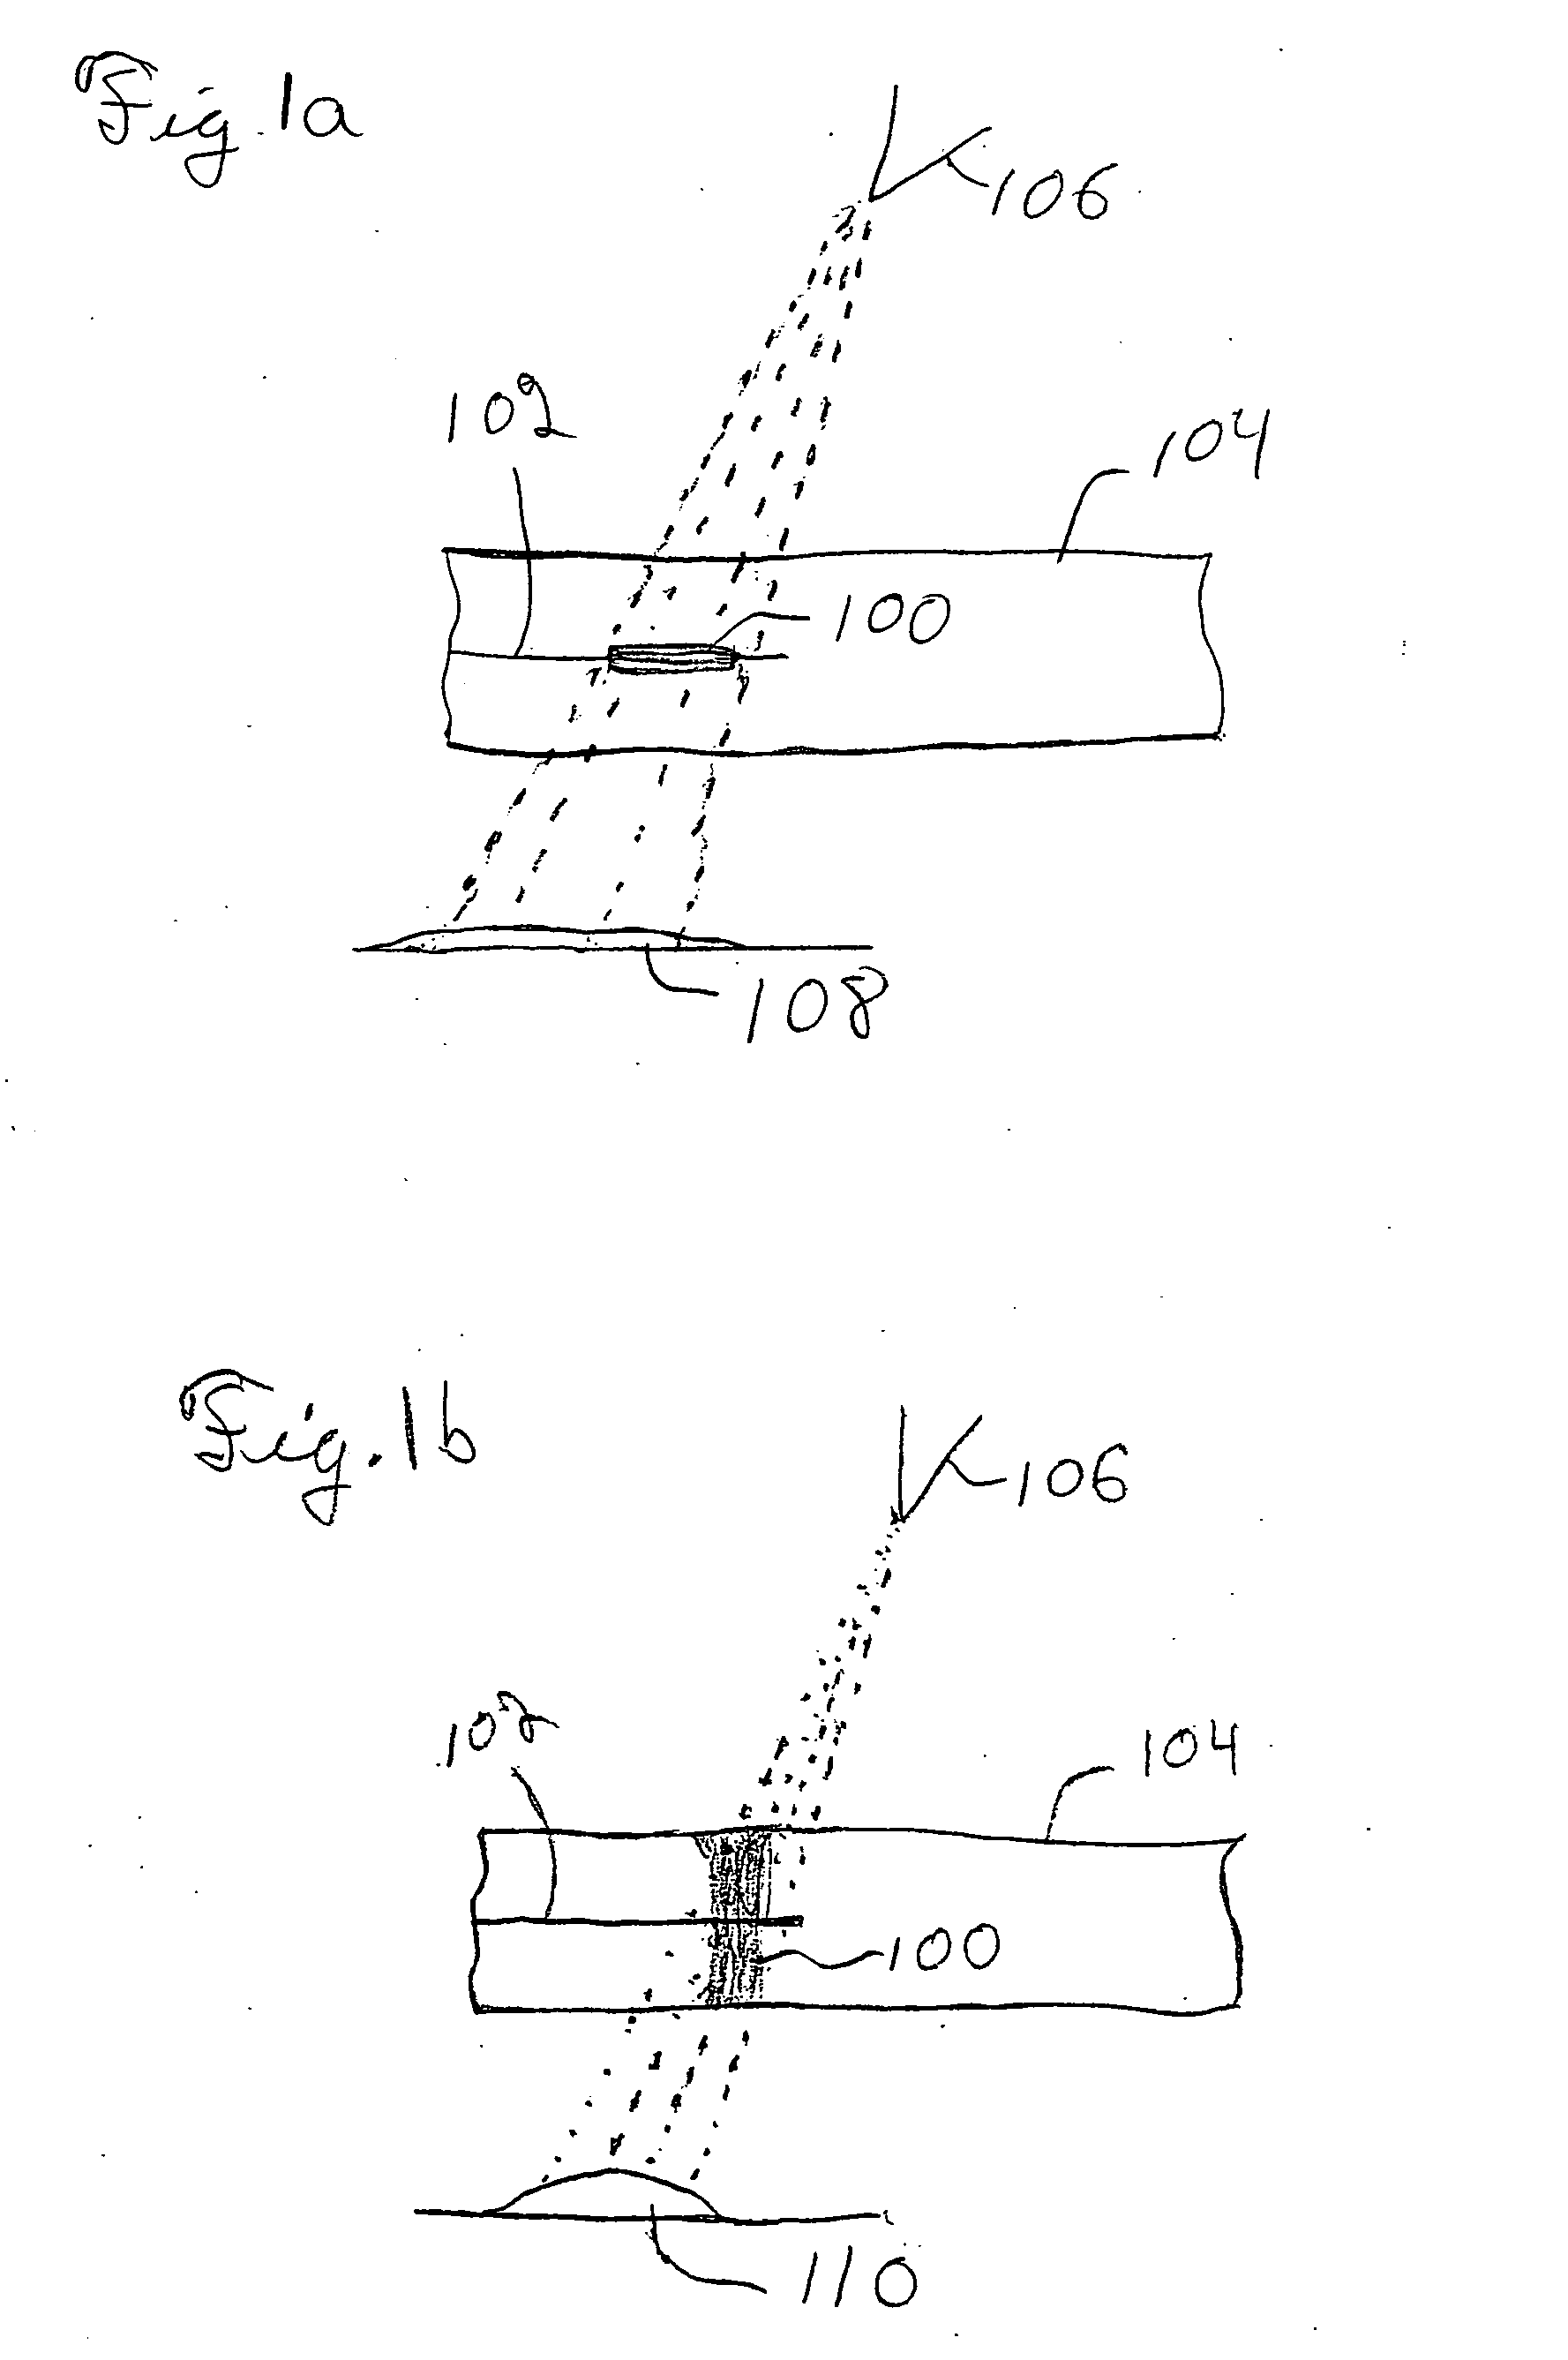 Radiopaque fibers and filtration matrices